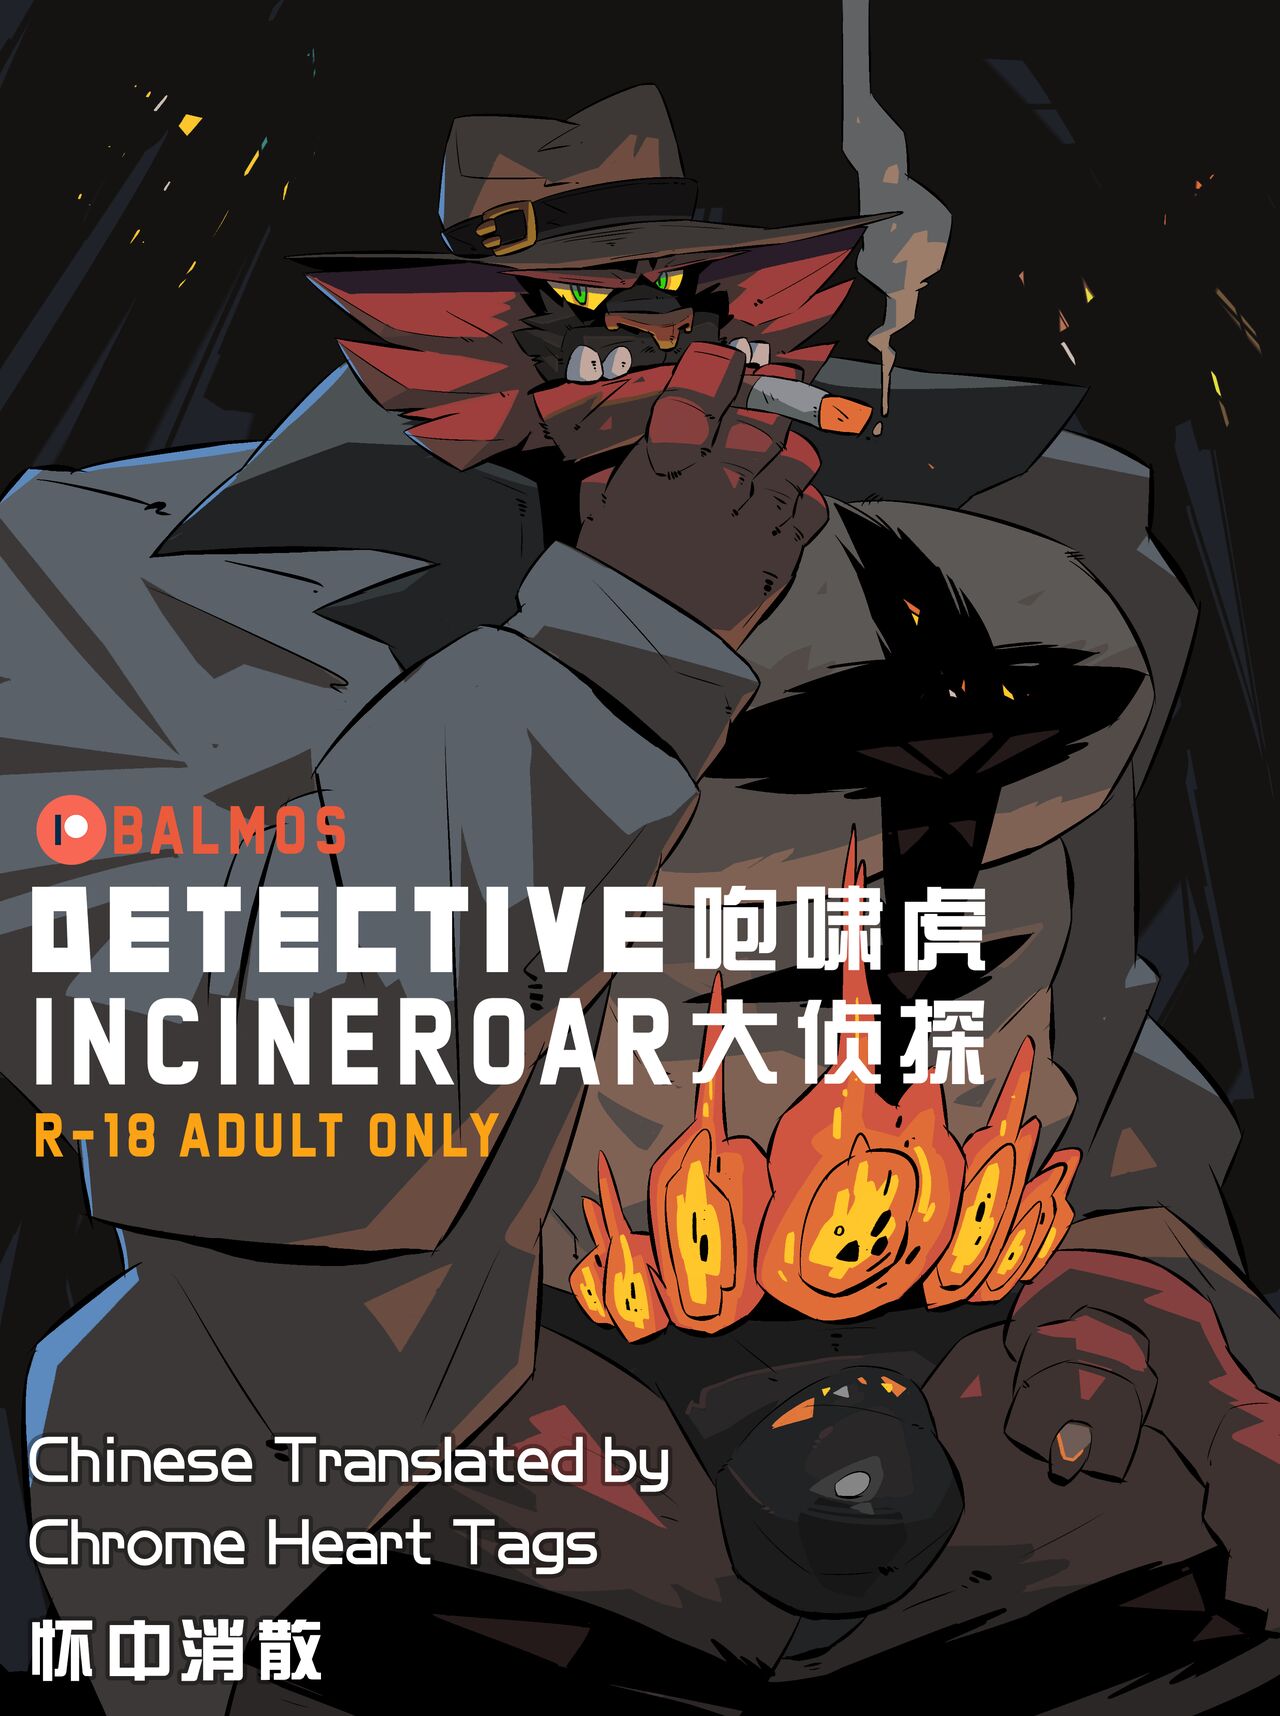 [Balmos] Detective Incineroar | 咆啸虎大侦探 [Chinese][Translated by Chrome Heart Tags] 